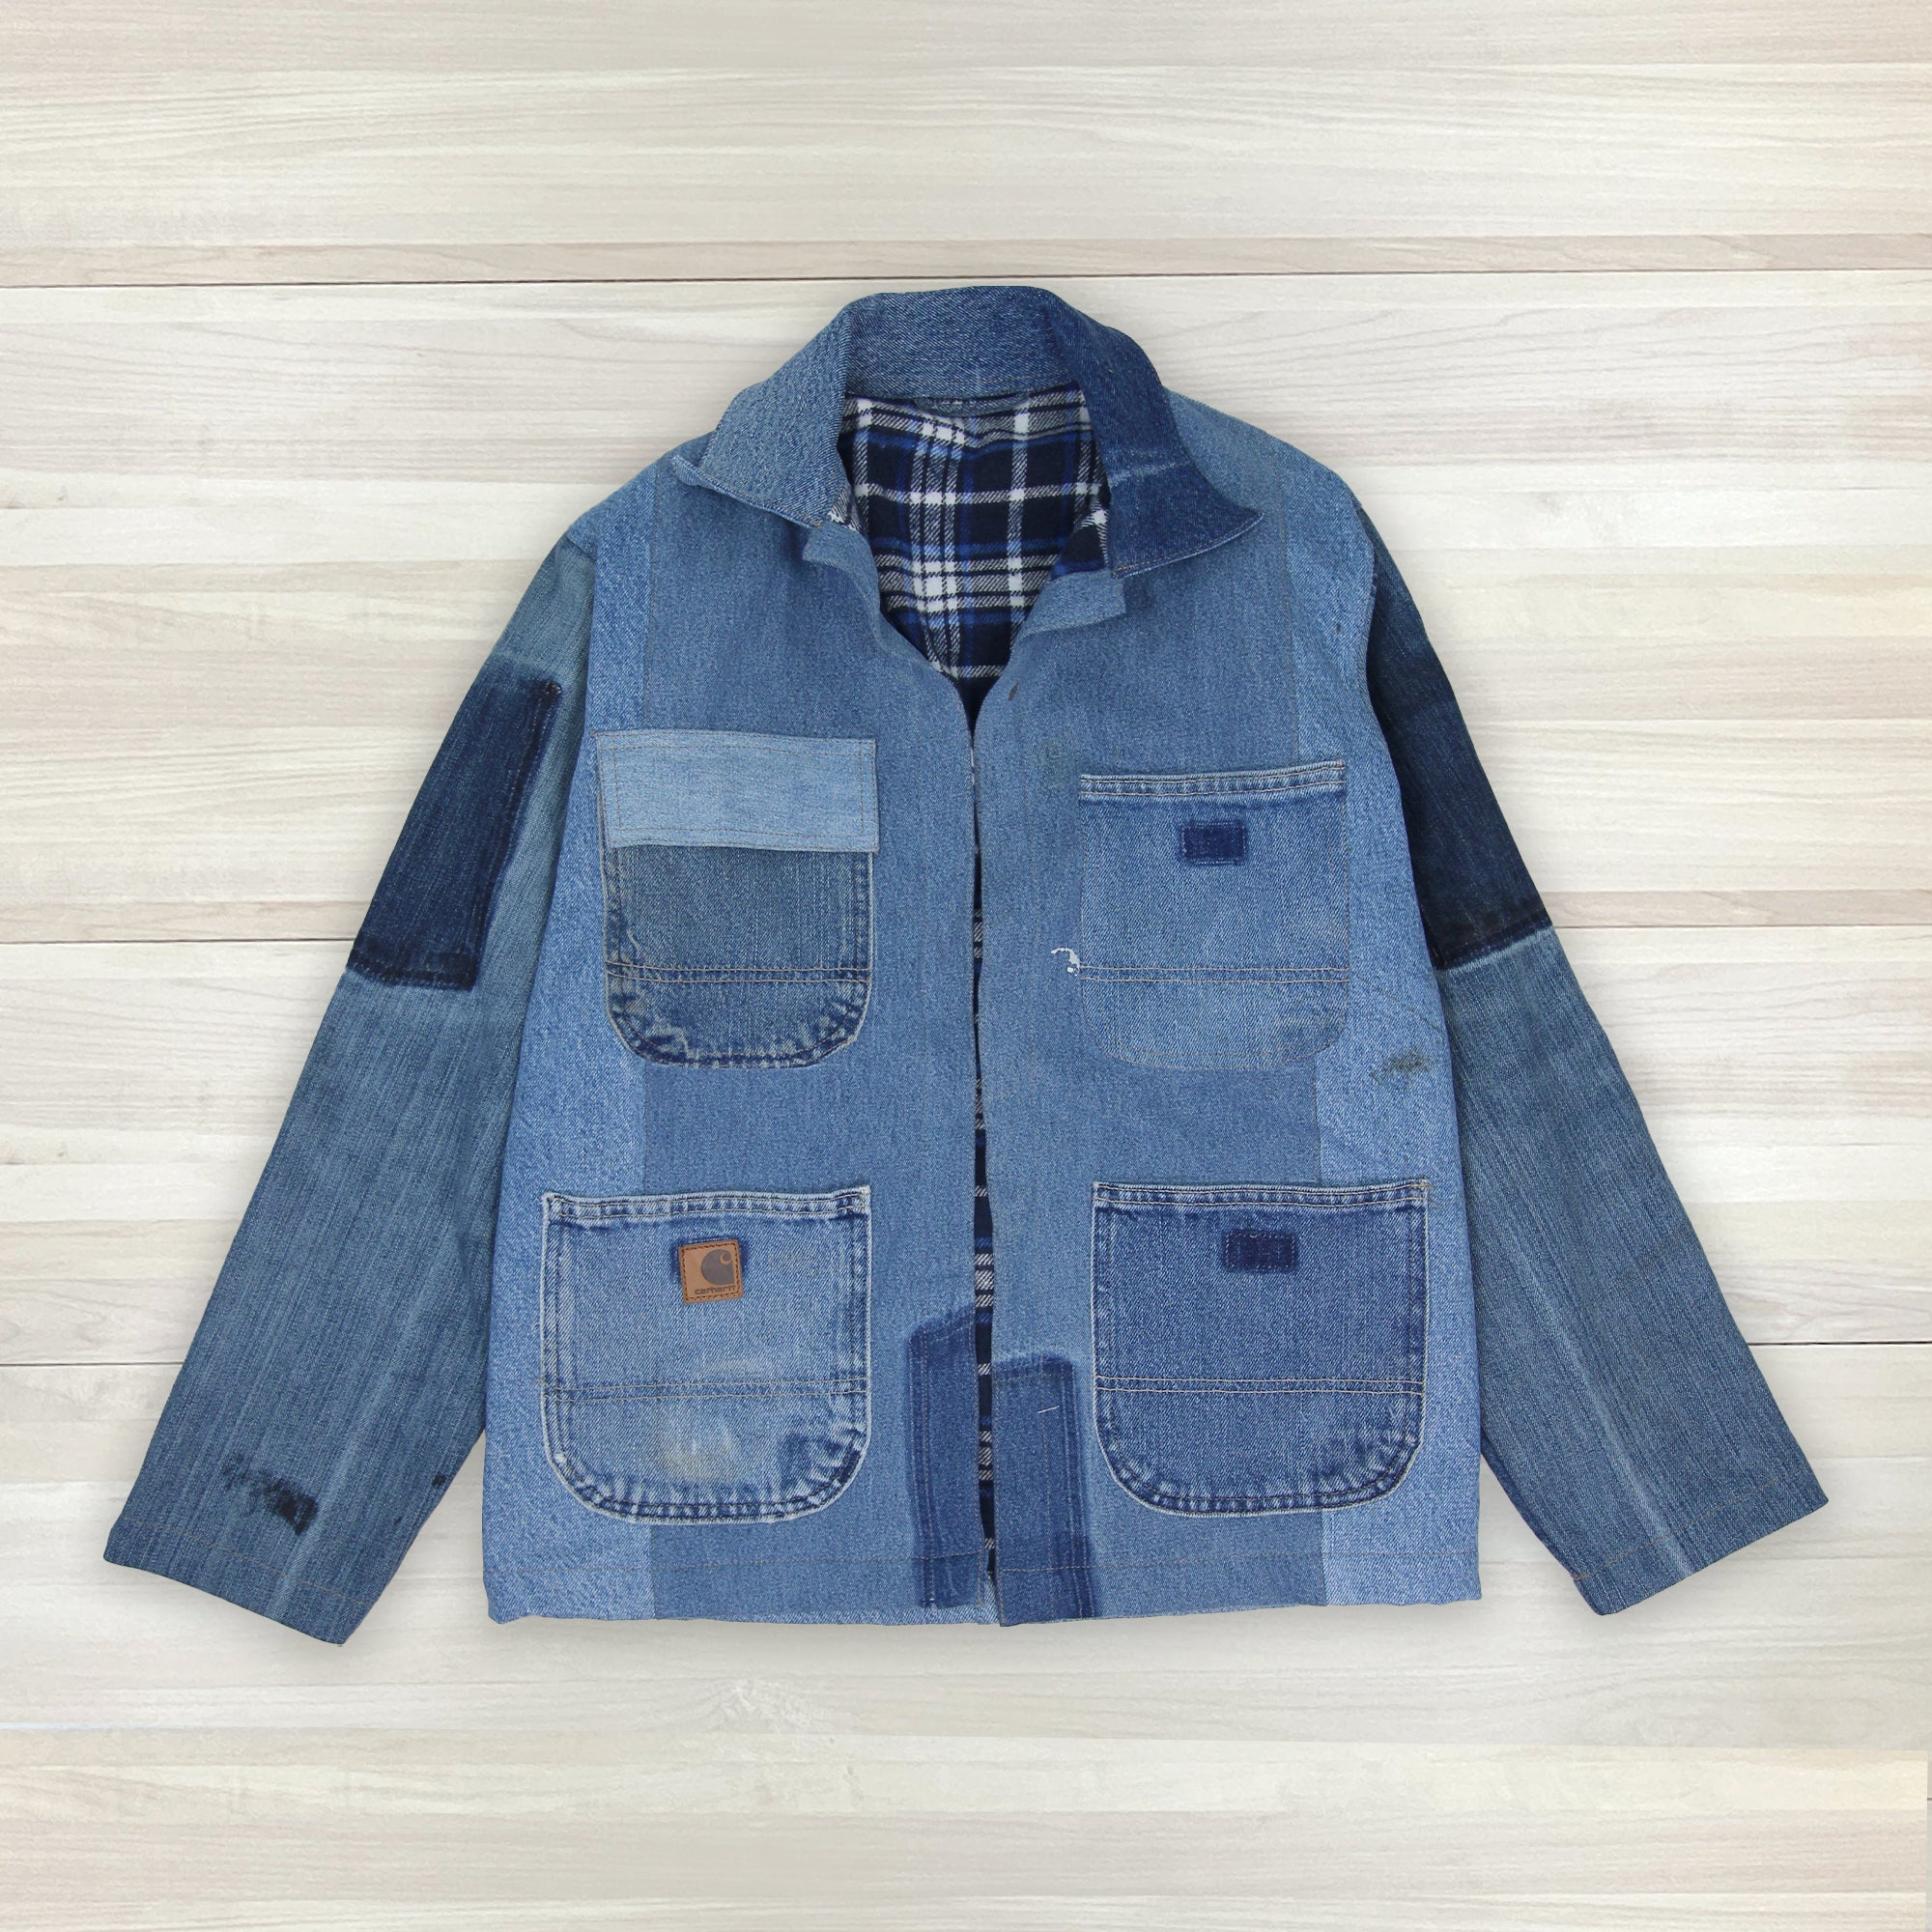 Chore Coat Made From Recycled Work Jeans - Small / Medium